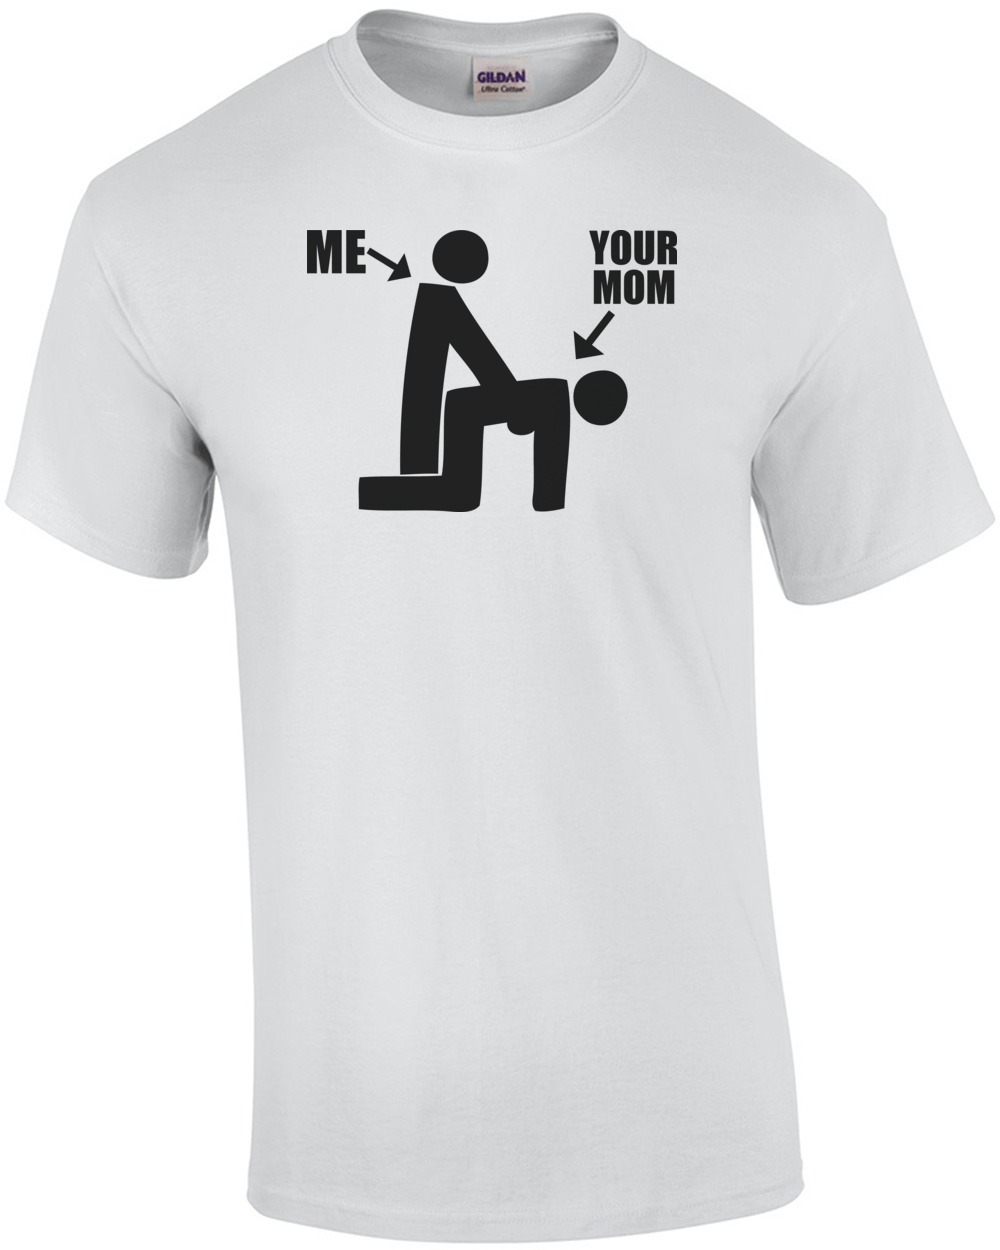 Funny Shirt Logo - Me And Your Mom Funny